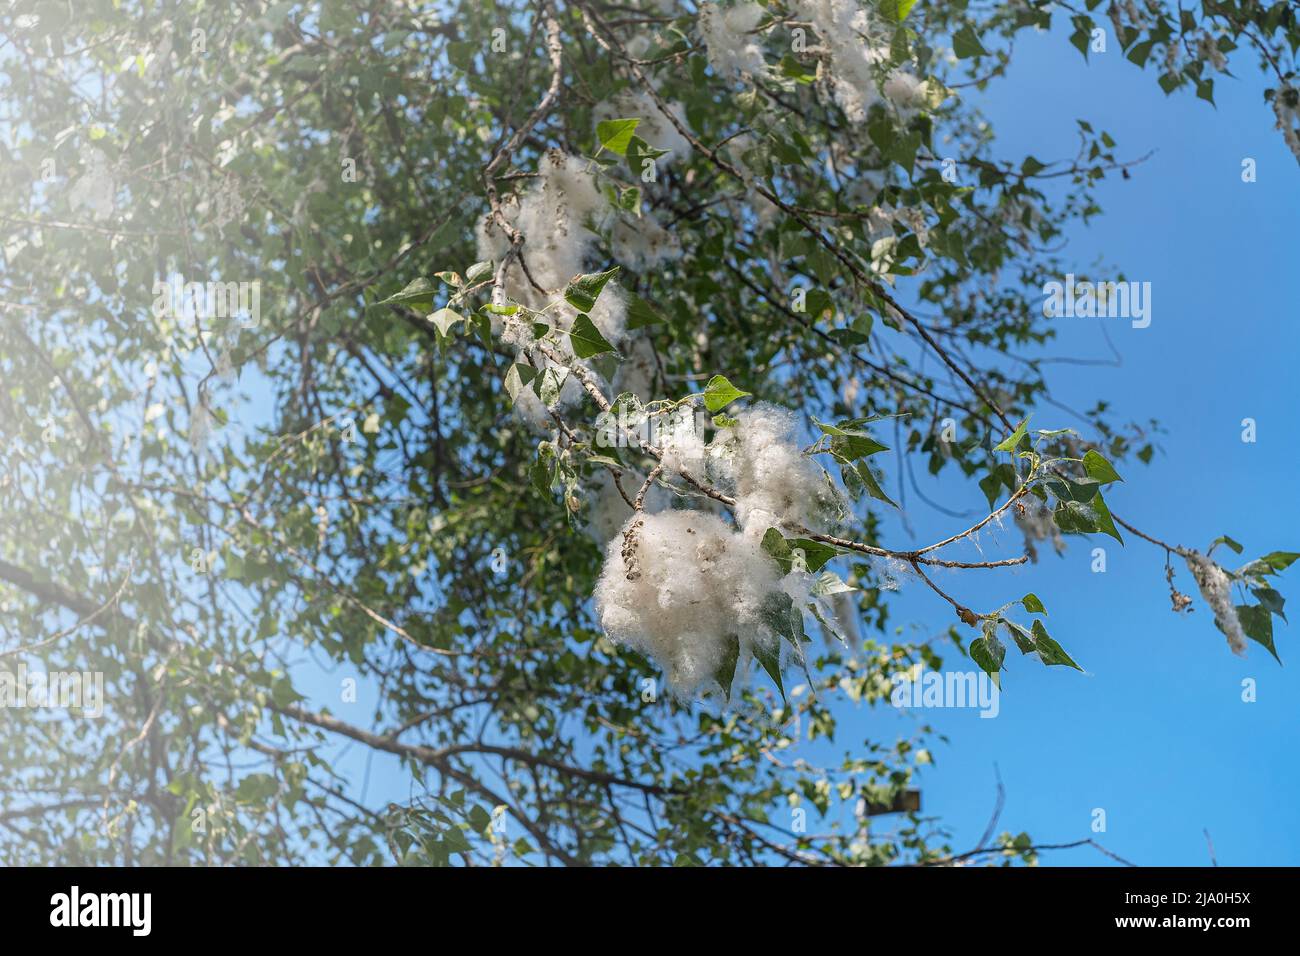 Poplar fluff on tree branches against the blue sky. Poplar fluff flies and make allergies. Stock Photo